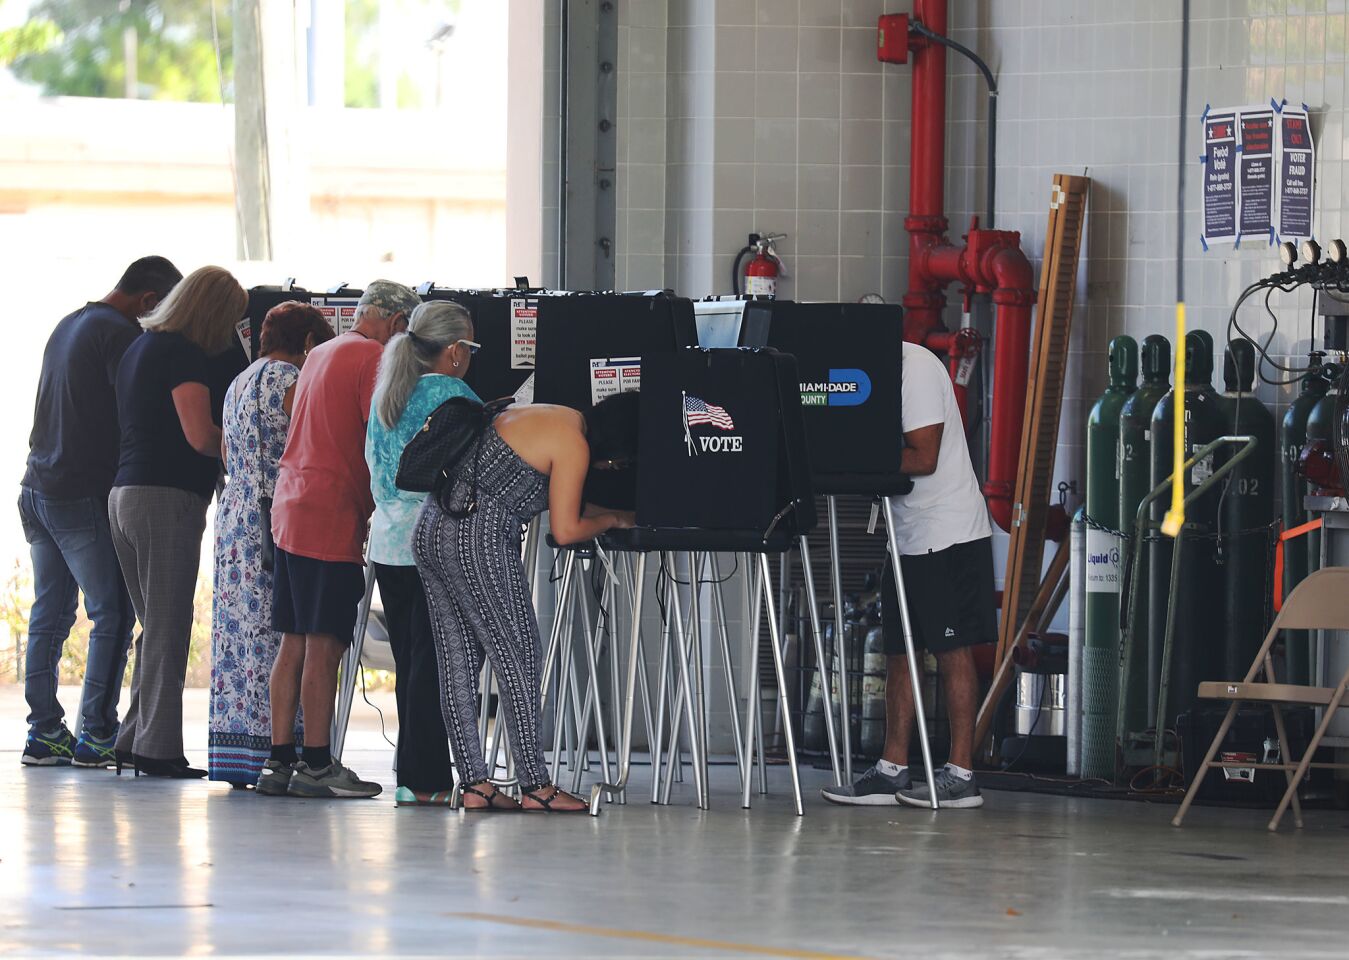 Voters cast their ballots at a polling station in a Hialeah, Fla., fire station.